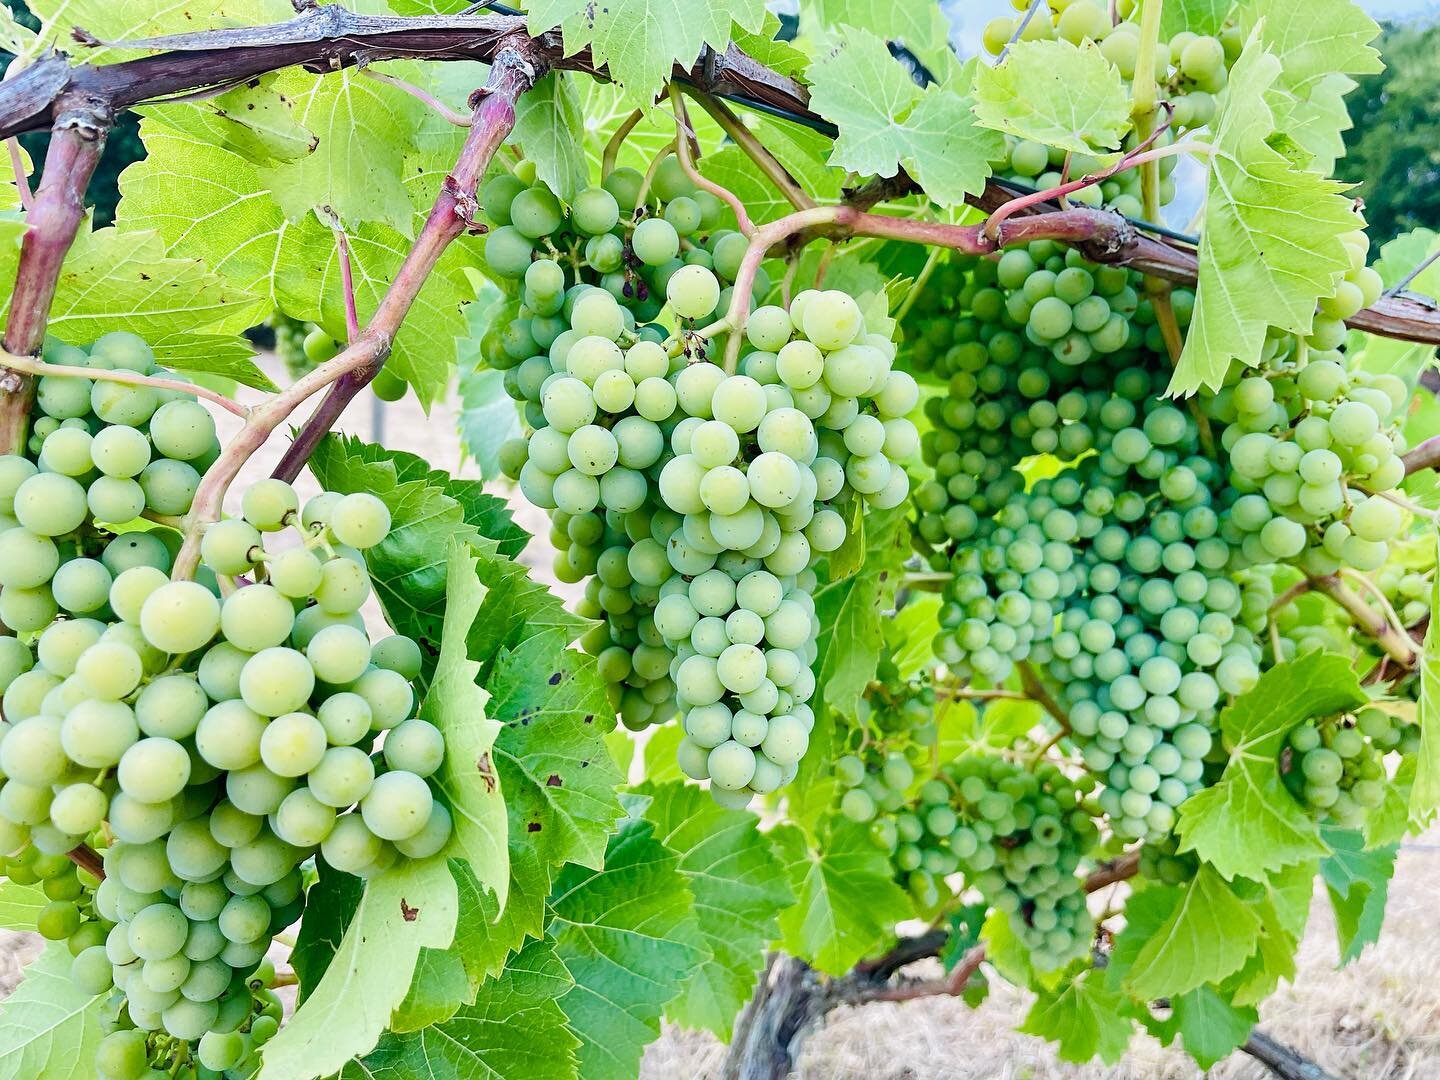 Grapes!
Seer Green&rsquo;s finest and original grapes: Seyval Blanc, Auxerrois and Pinot Noir. Great to see this vineyard looking spruced up and with excellent grape development. Veraison (colour change/ripening) in full swing&hellip;

#englishvineya